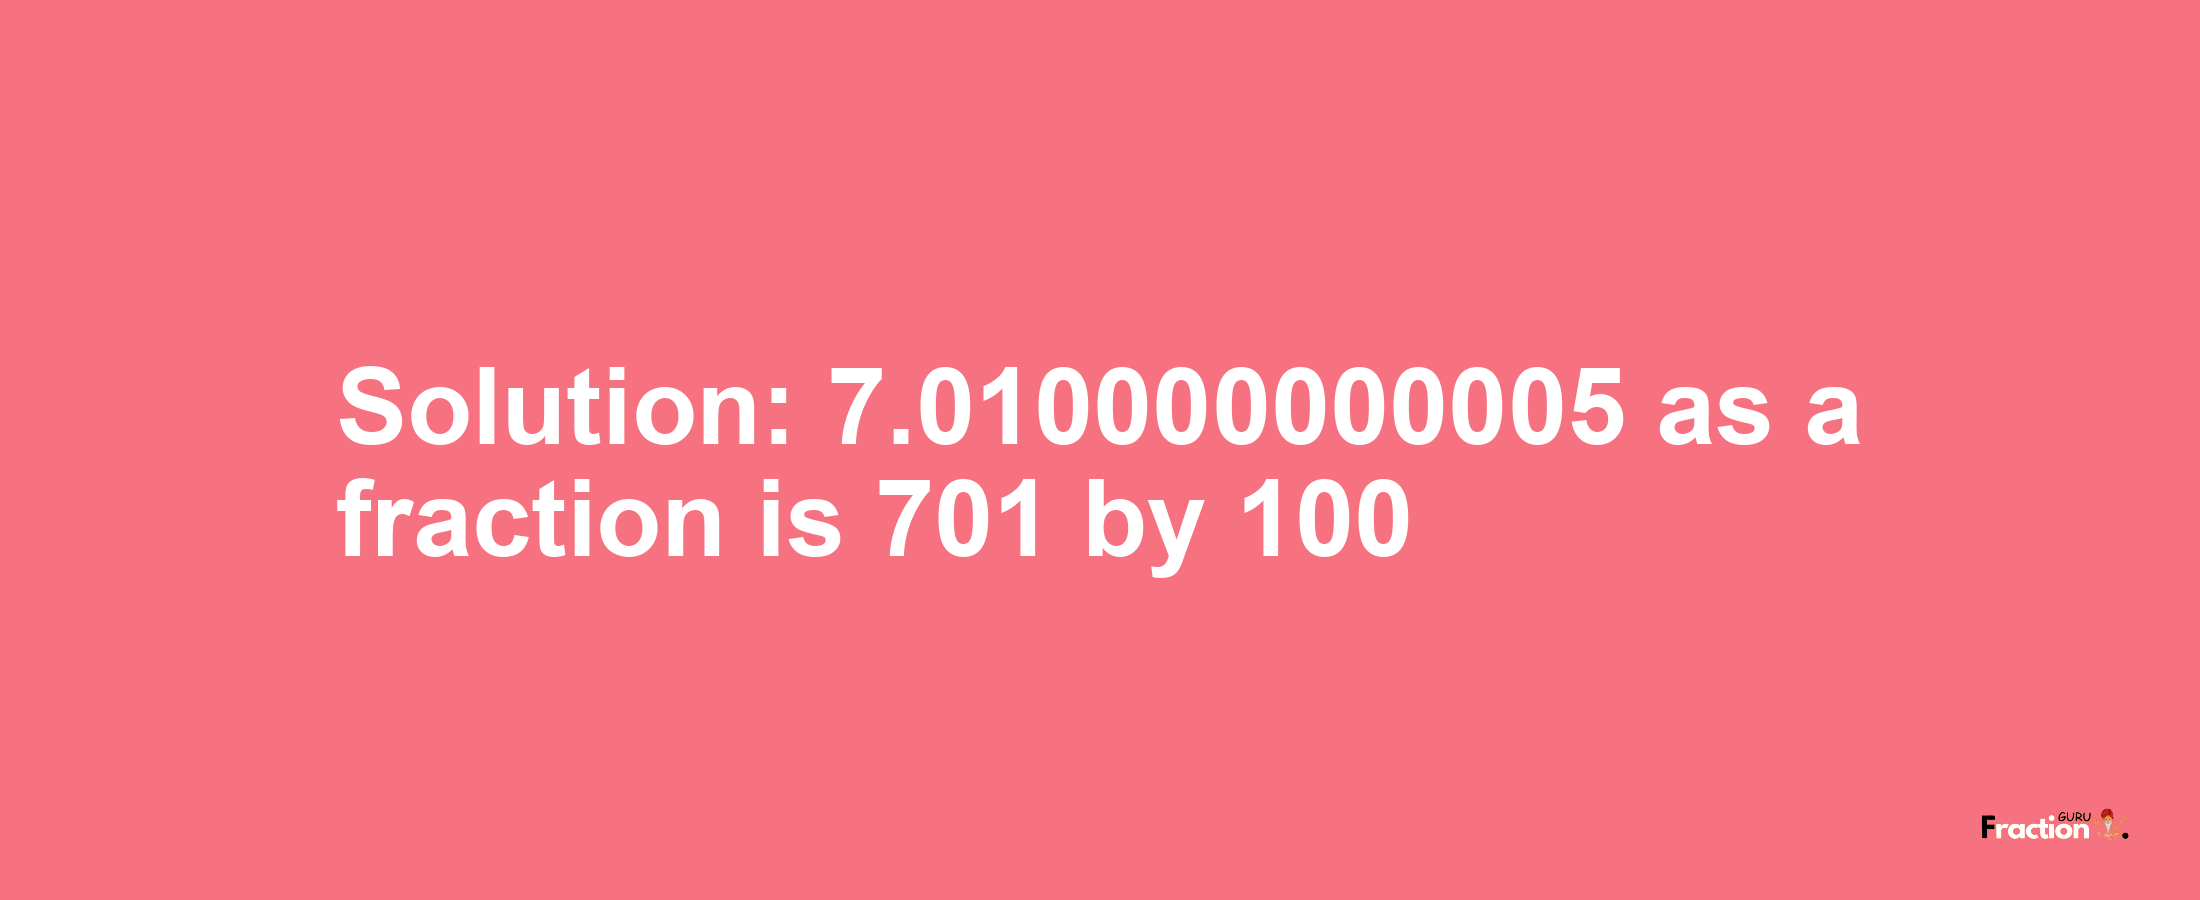 Solution:7.010000000005 as a fraction is 701/100